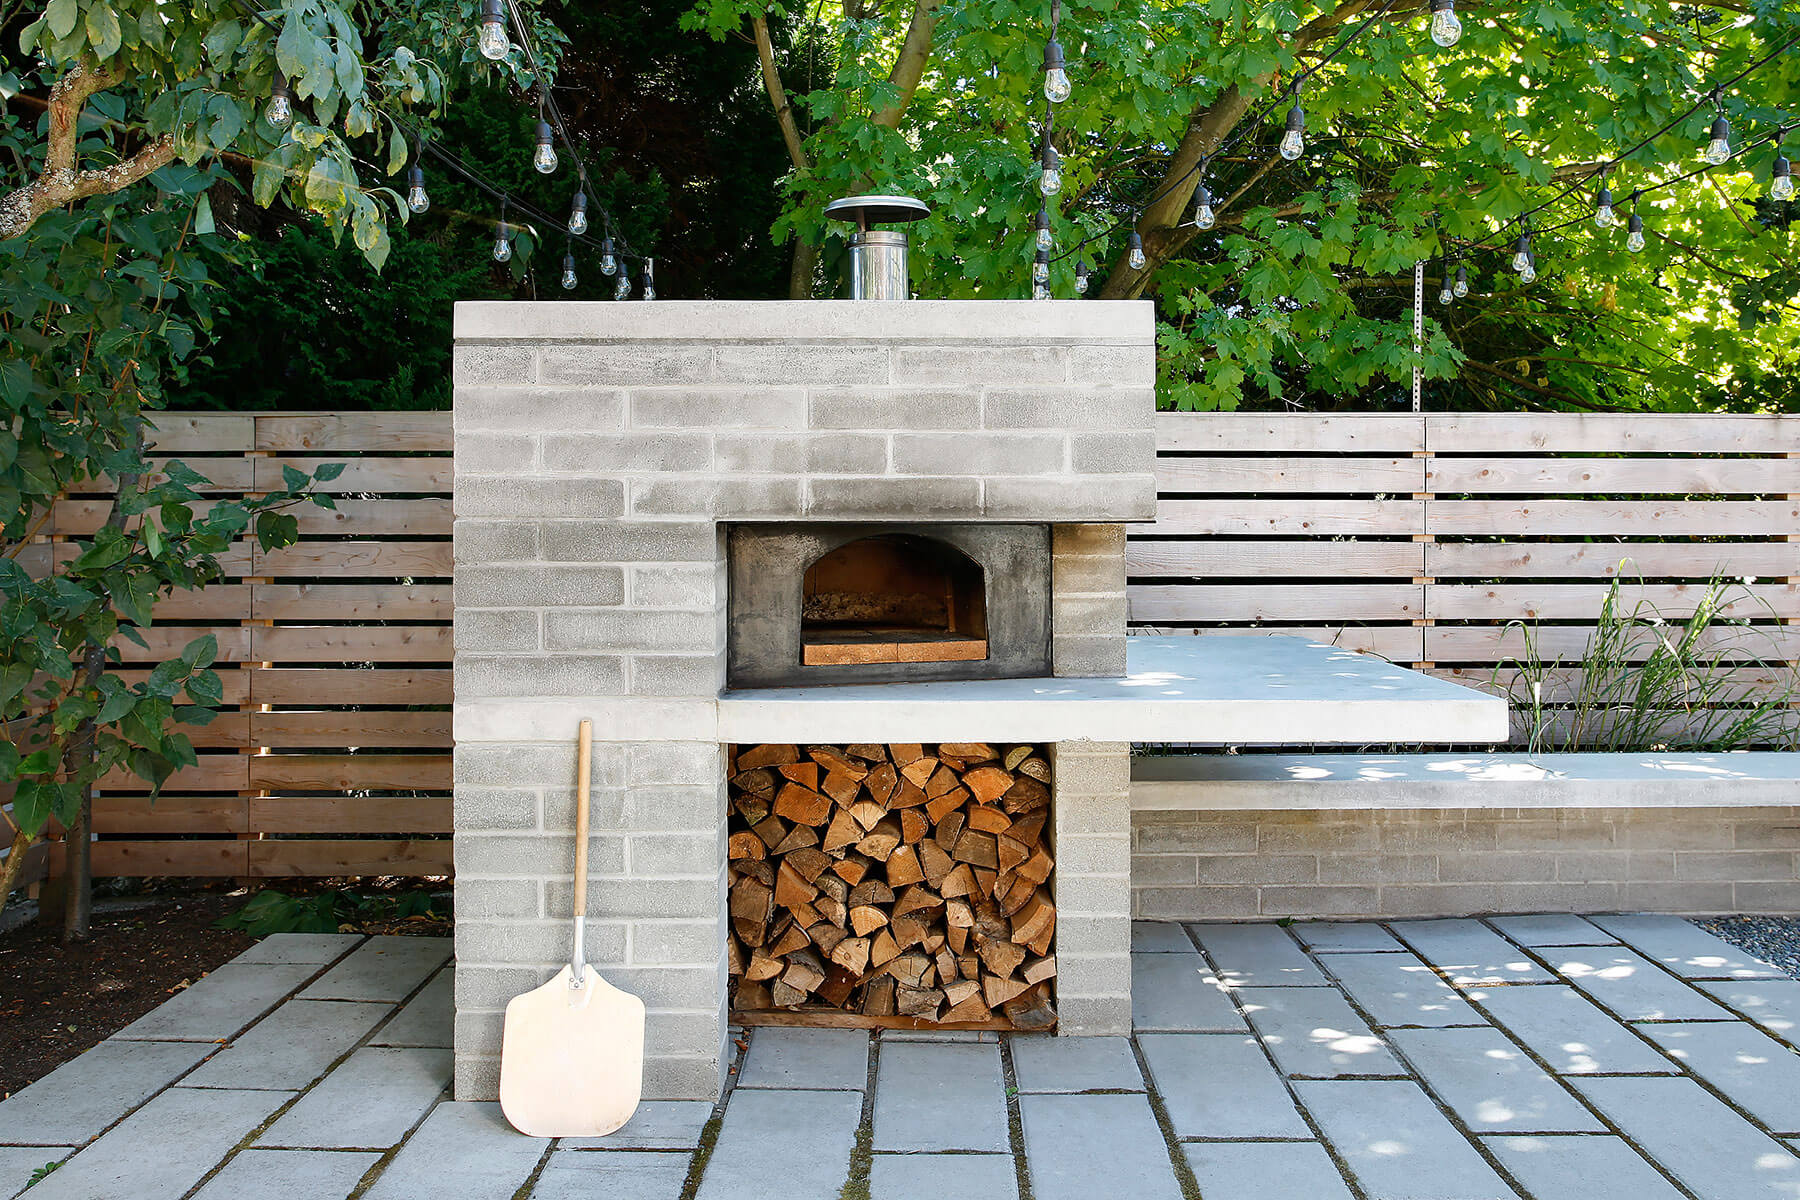 Shed Architecture Design Seattle, Fire Pit Pizza Oven